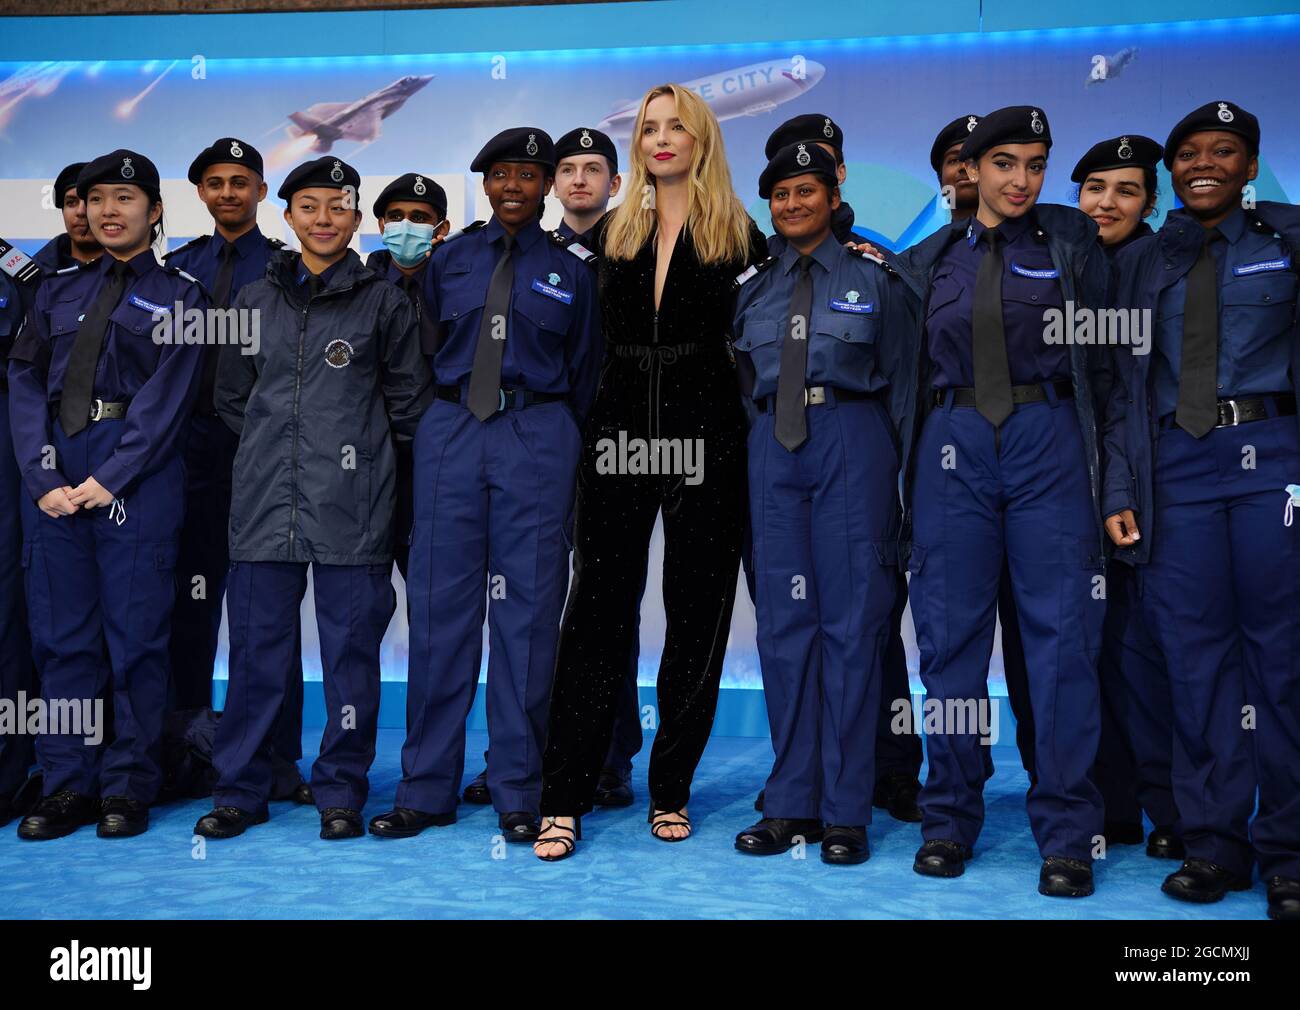 https://c8.alamy.com/comp/2GCMXJJ/jodie-comer-alongside-police-cadets-at-cineworld-leicester-square-central-london-for-the-premiere-of-free-guy-picture-date-monday-august-9-2021-2GCMXJJ.jpg